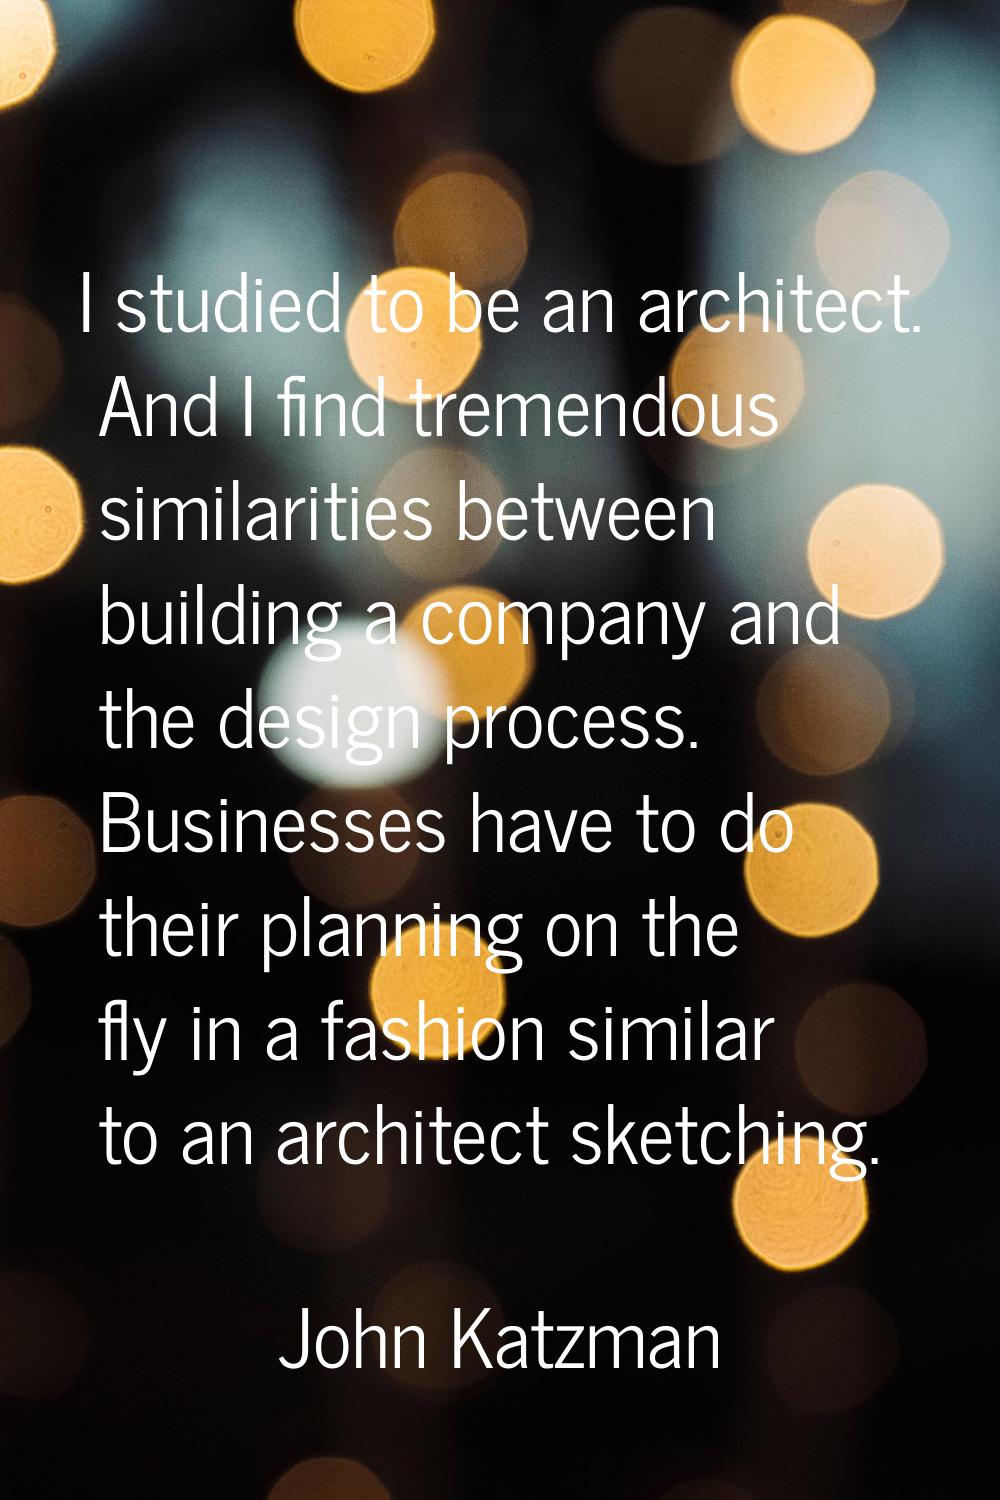 I studied to be an architect. And I find tremendous similarities between building a company and the